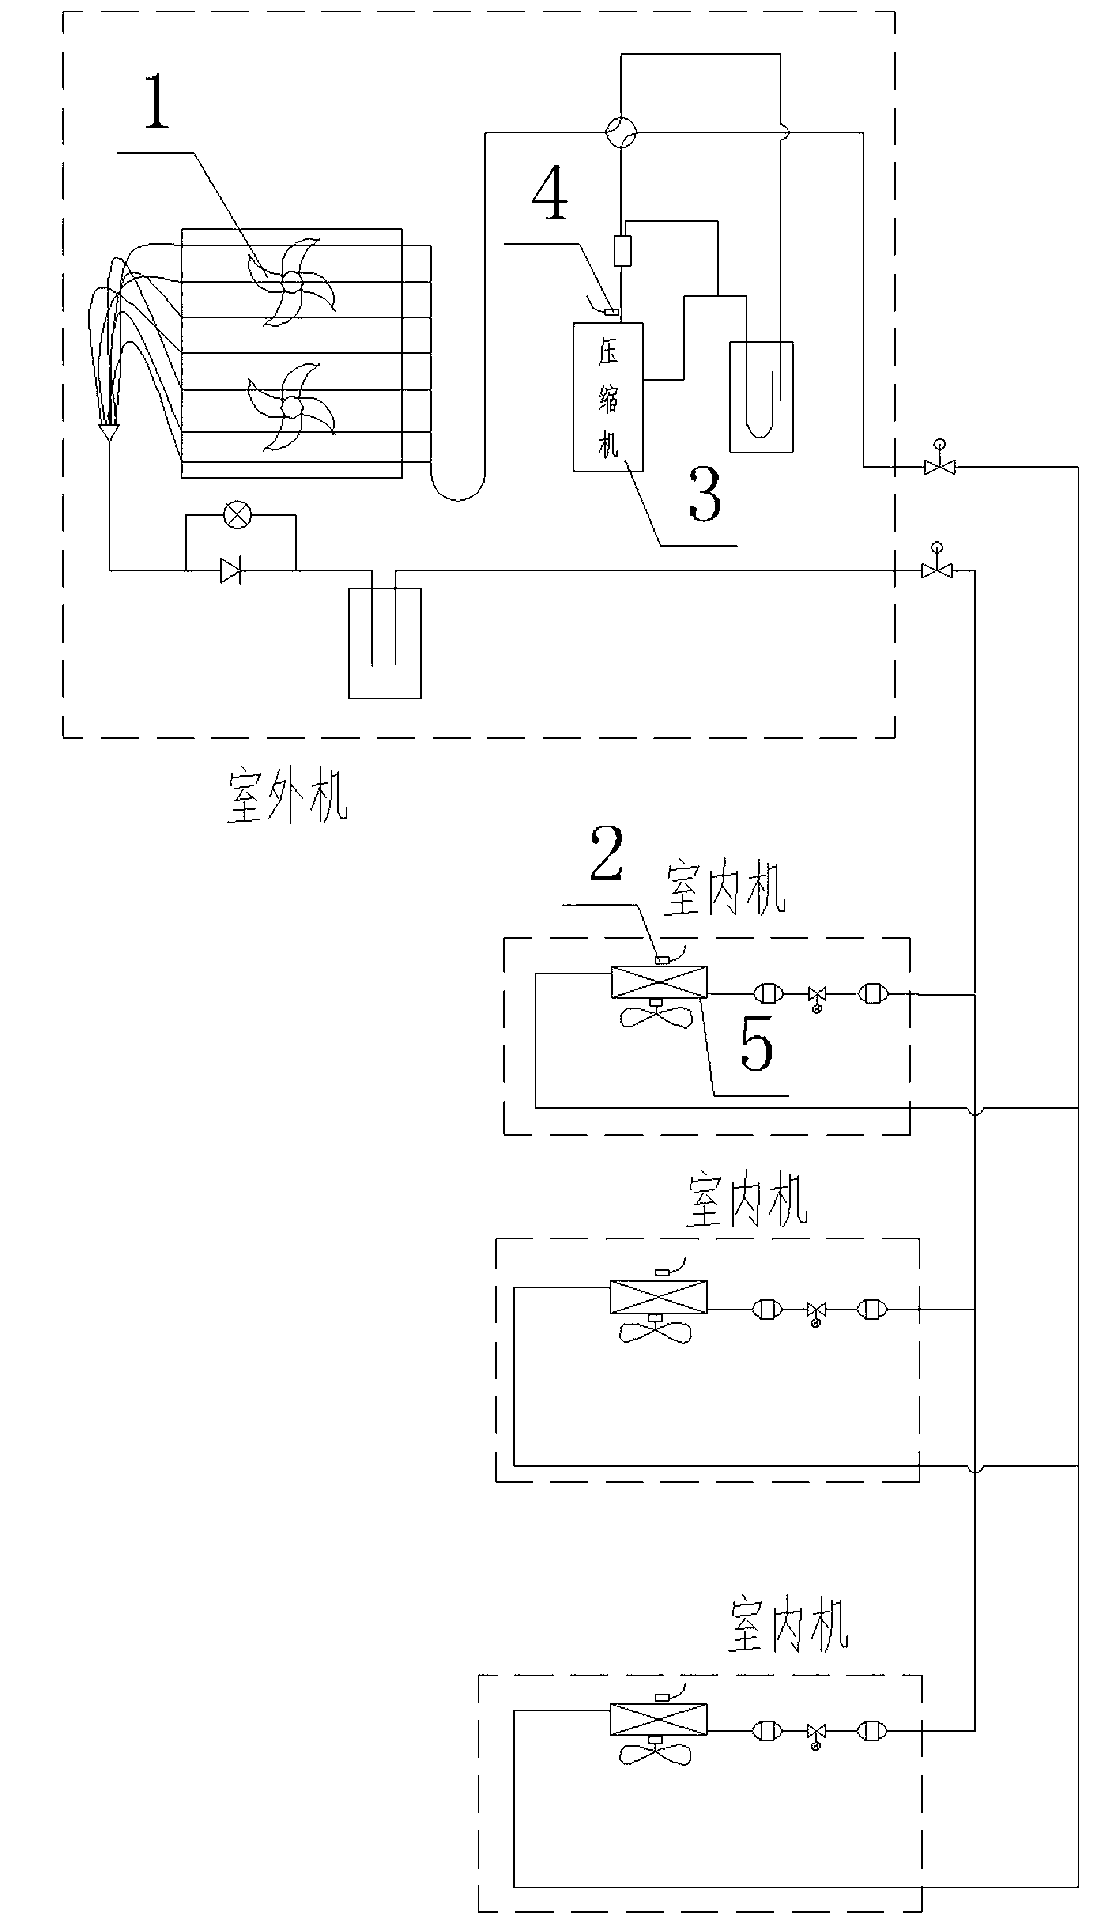 Control method of outdoor fan during heating of variable-frequency multi-connection type air conditioning unit